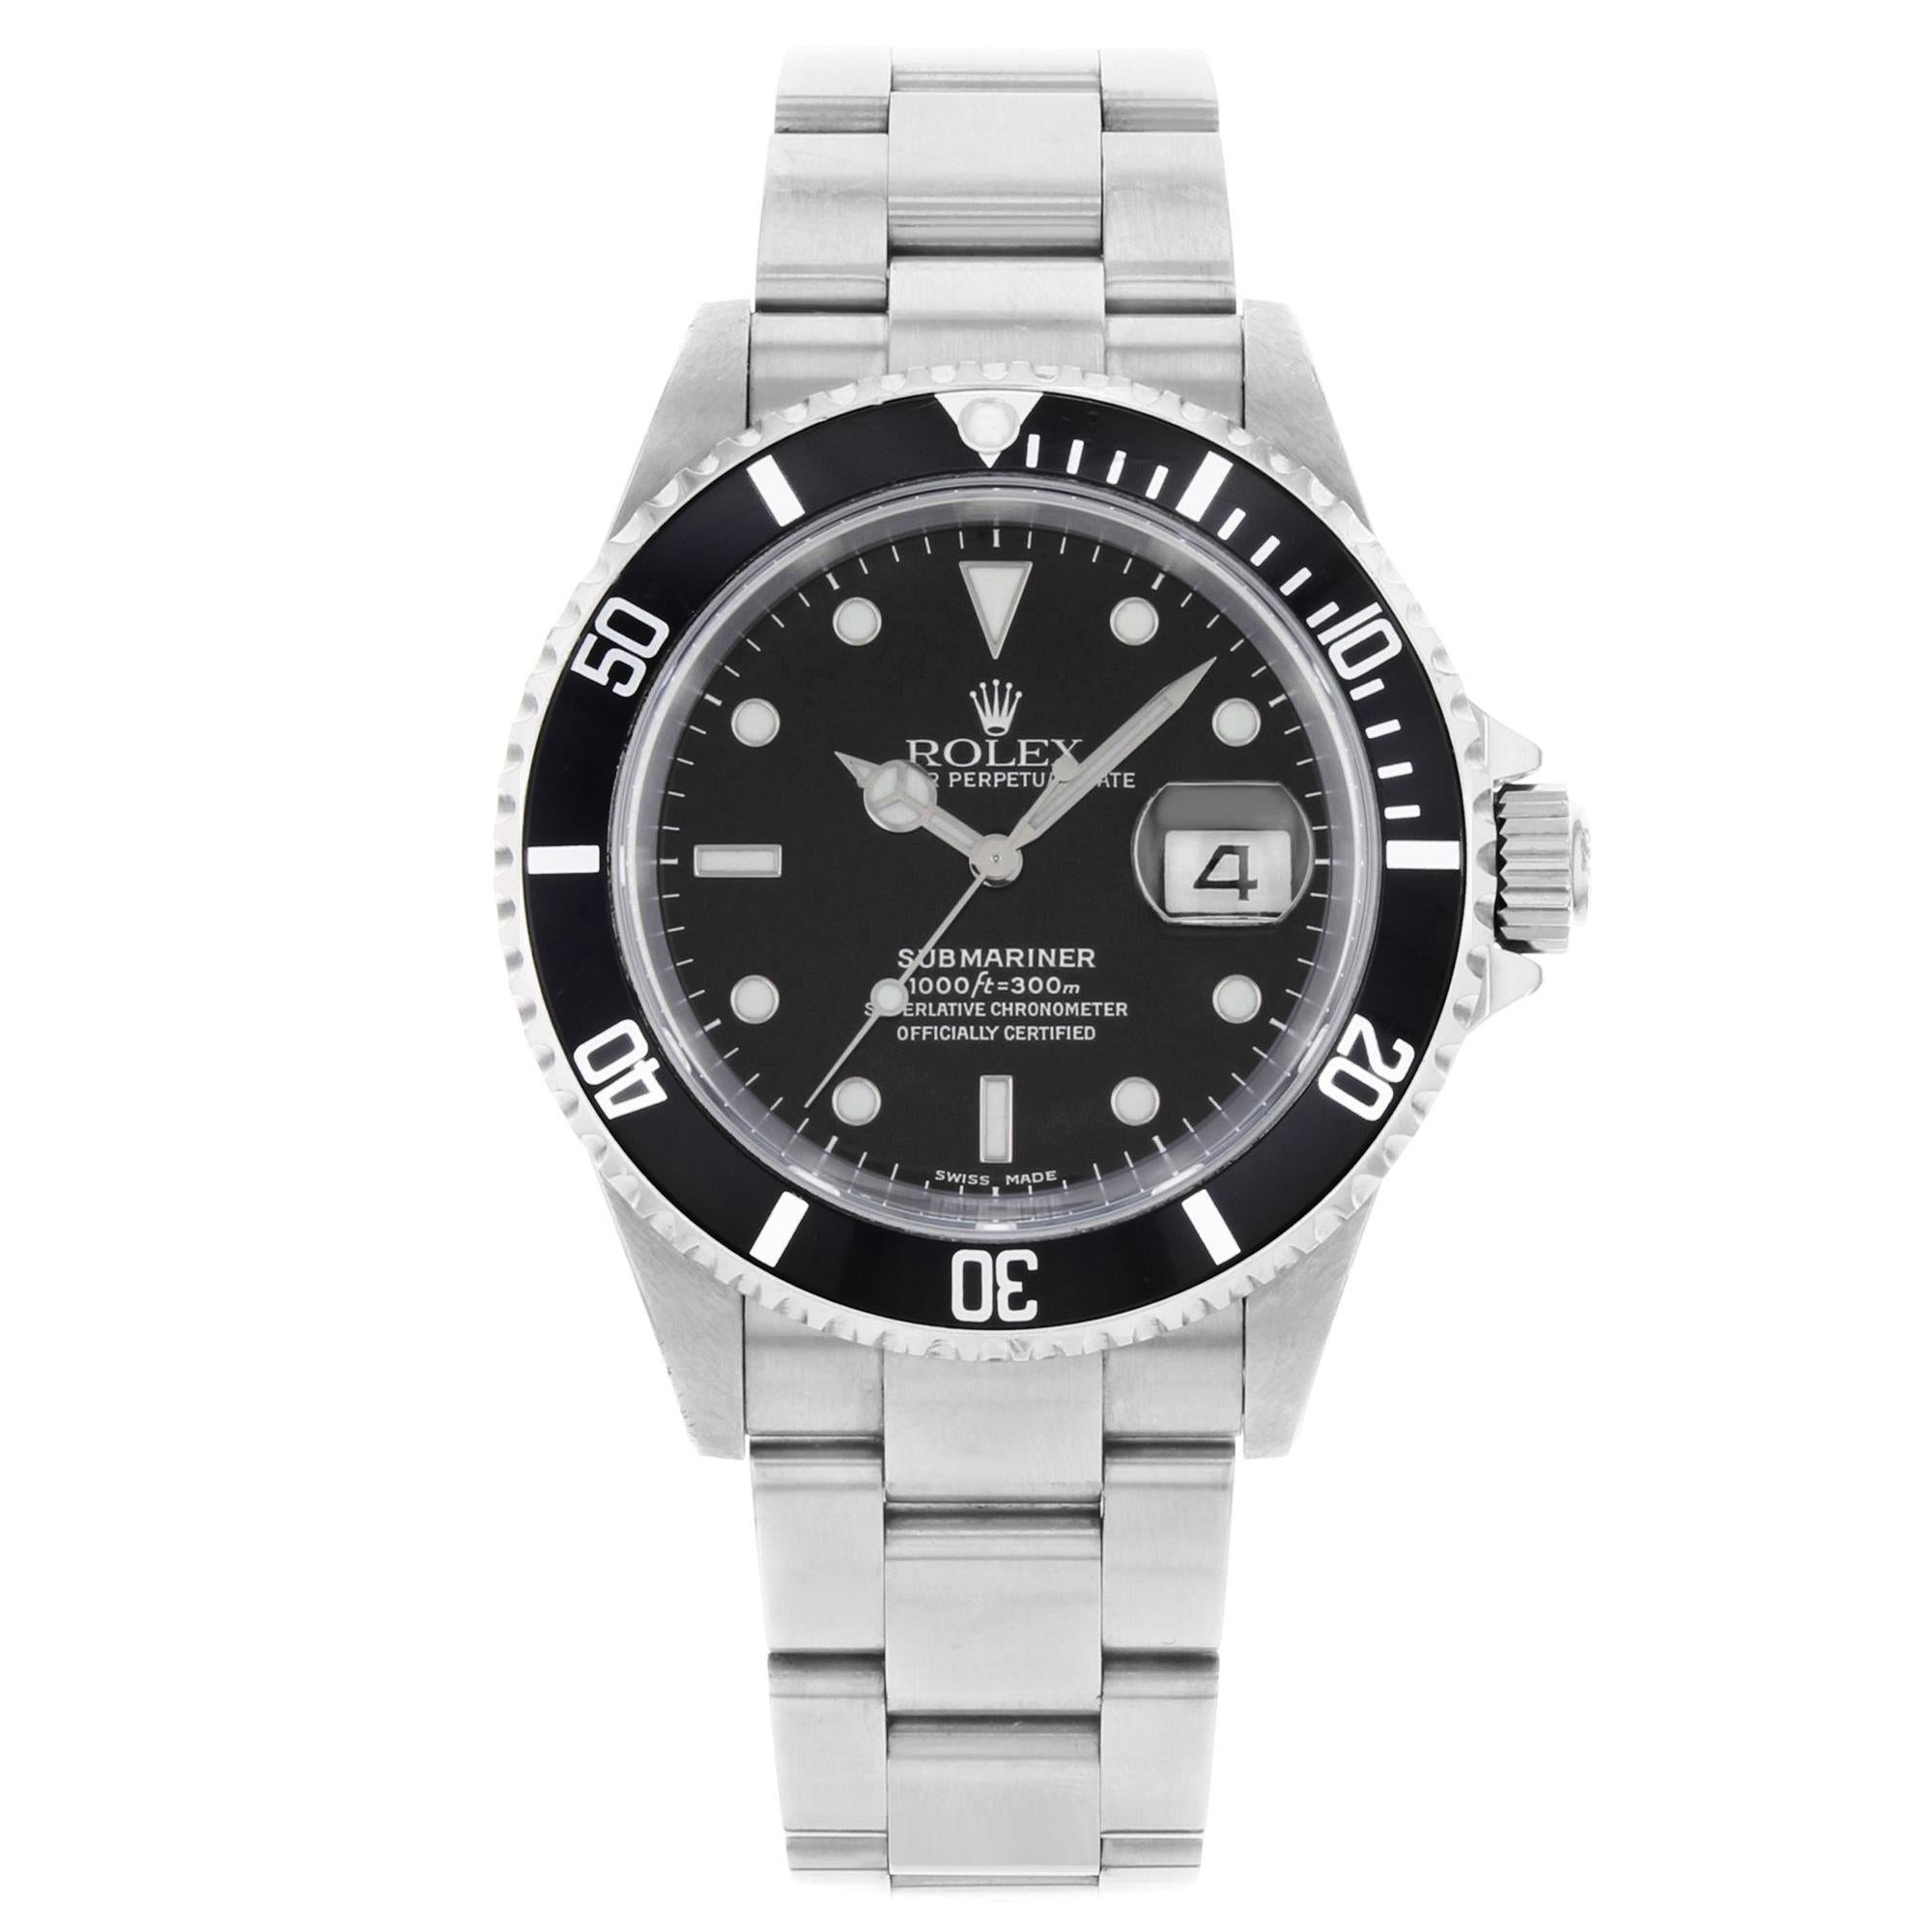 Rolex Submariner 16610 2002 Black Dial No Holes Steel Automatic Men's Watch